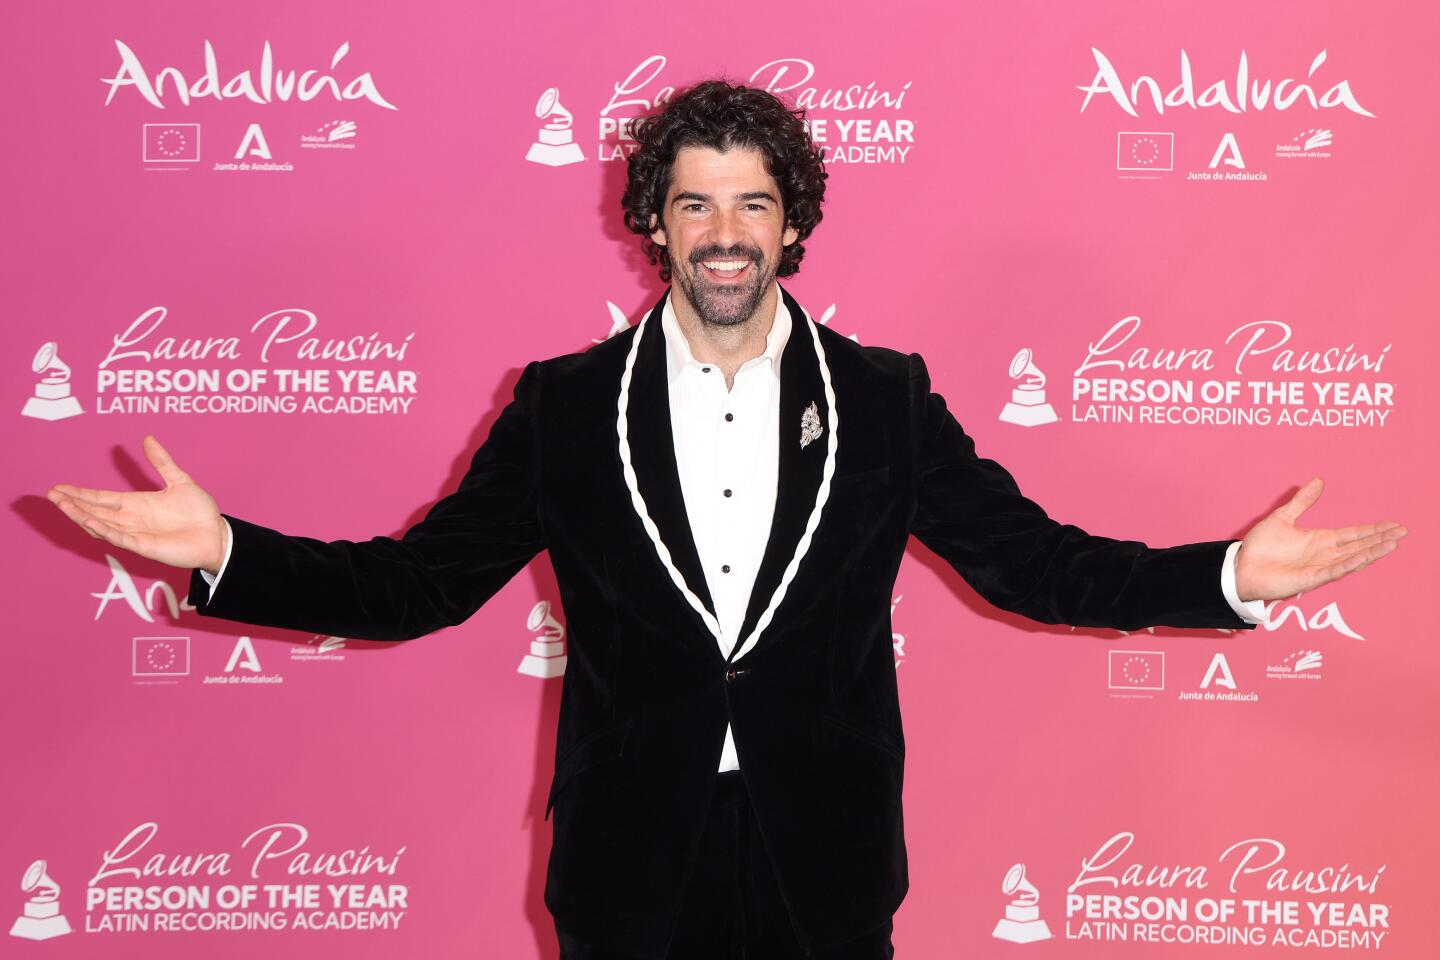 Latin Recording Academy Person of The Year Honoring Laura Pausini - Arrivals